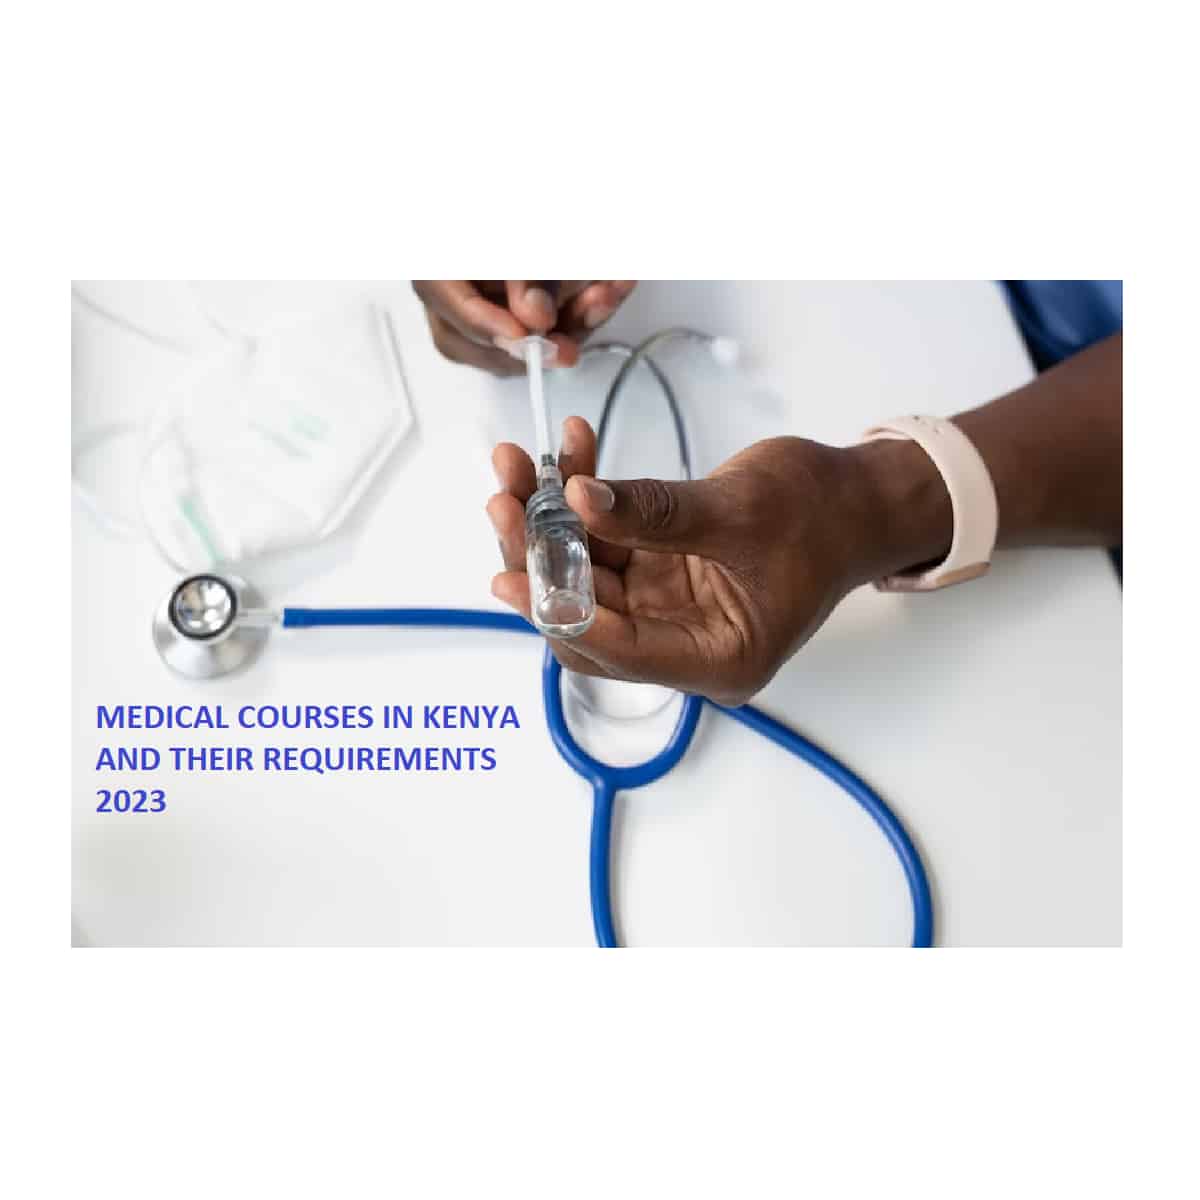 Medical Courses in Kenya and their Requirements